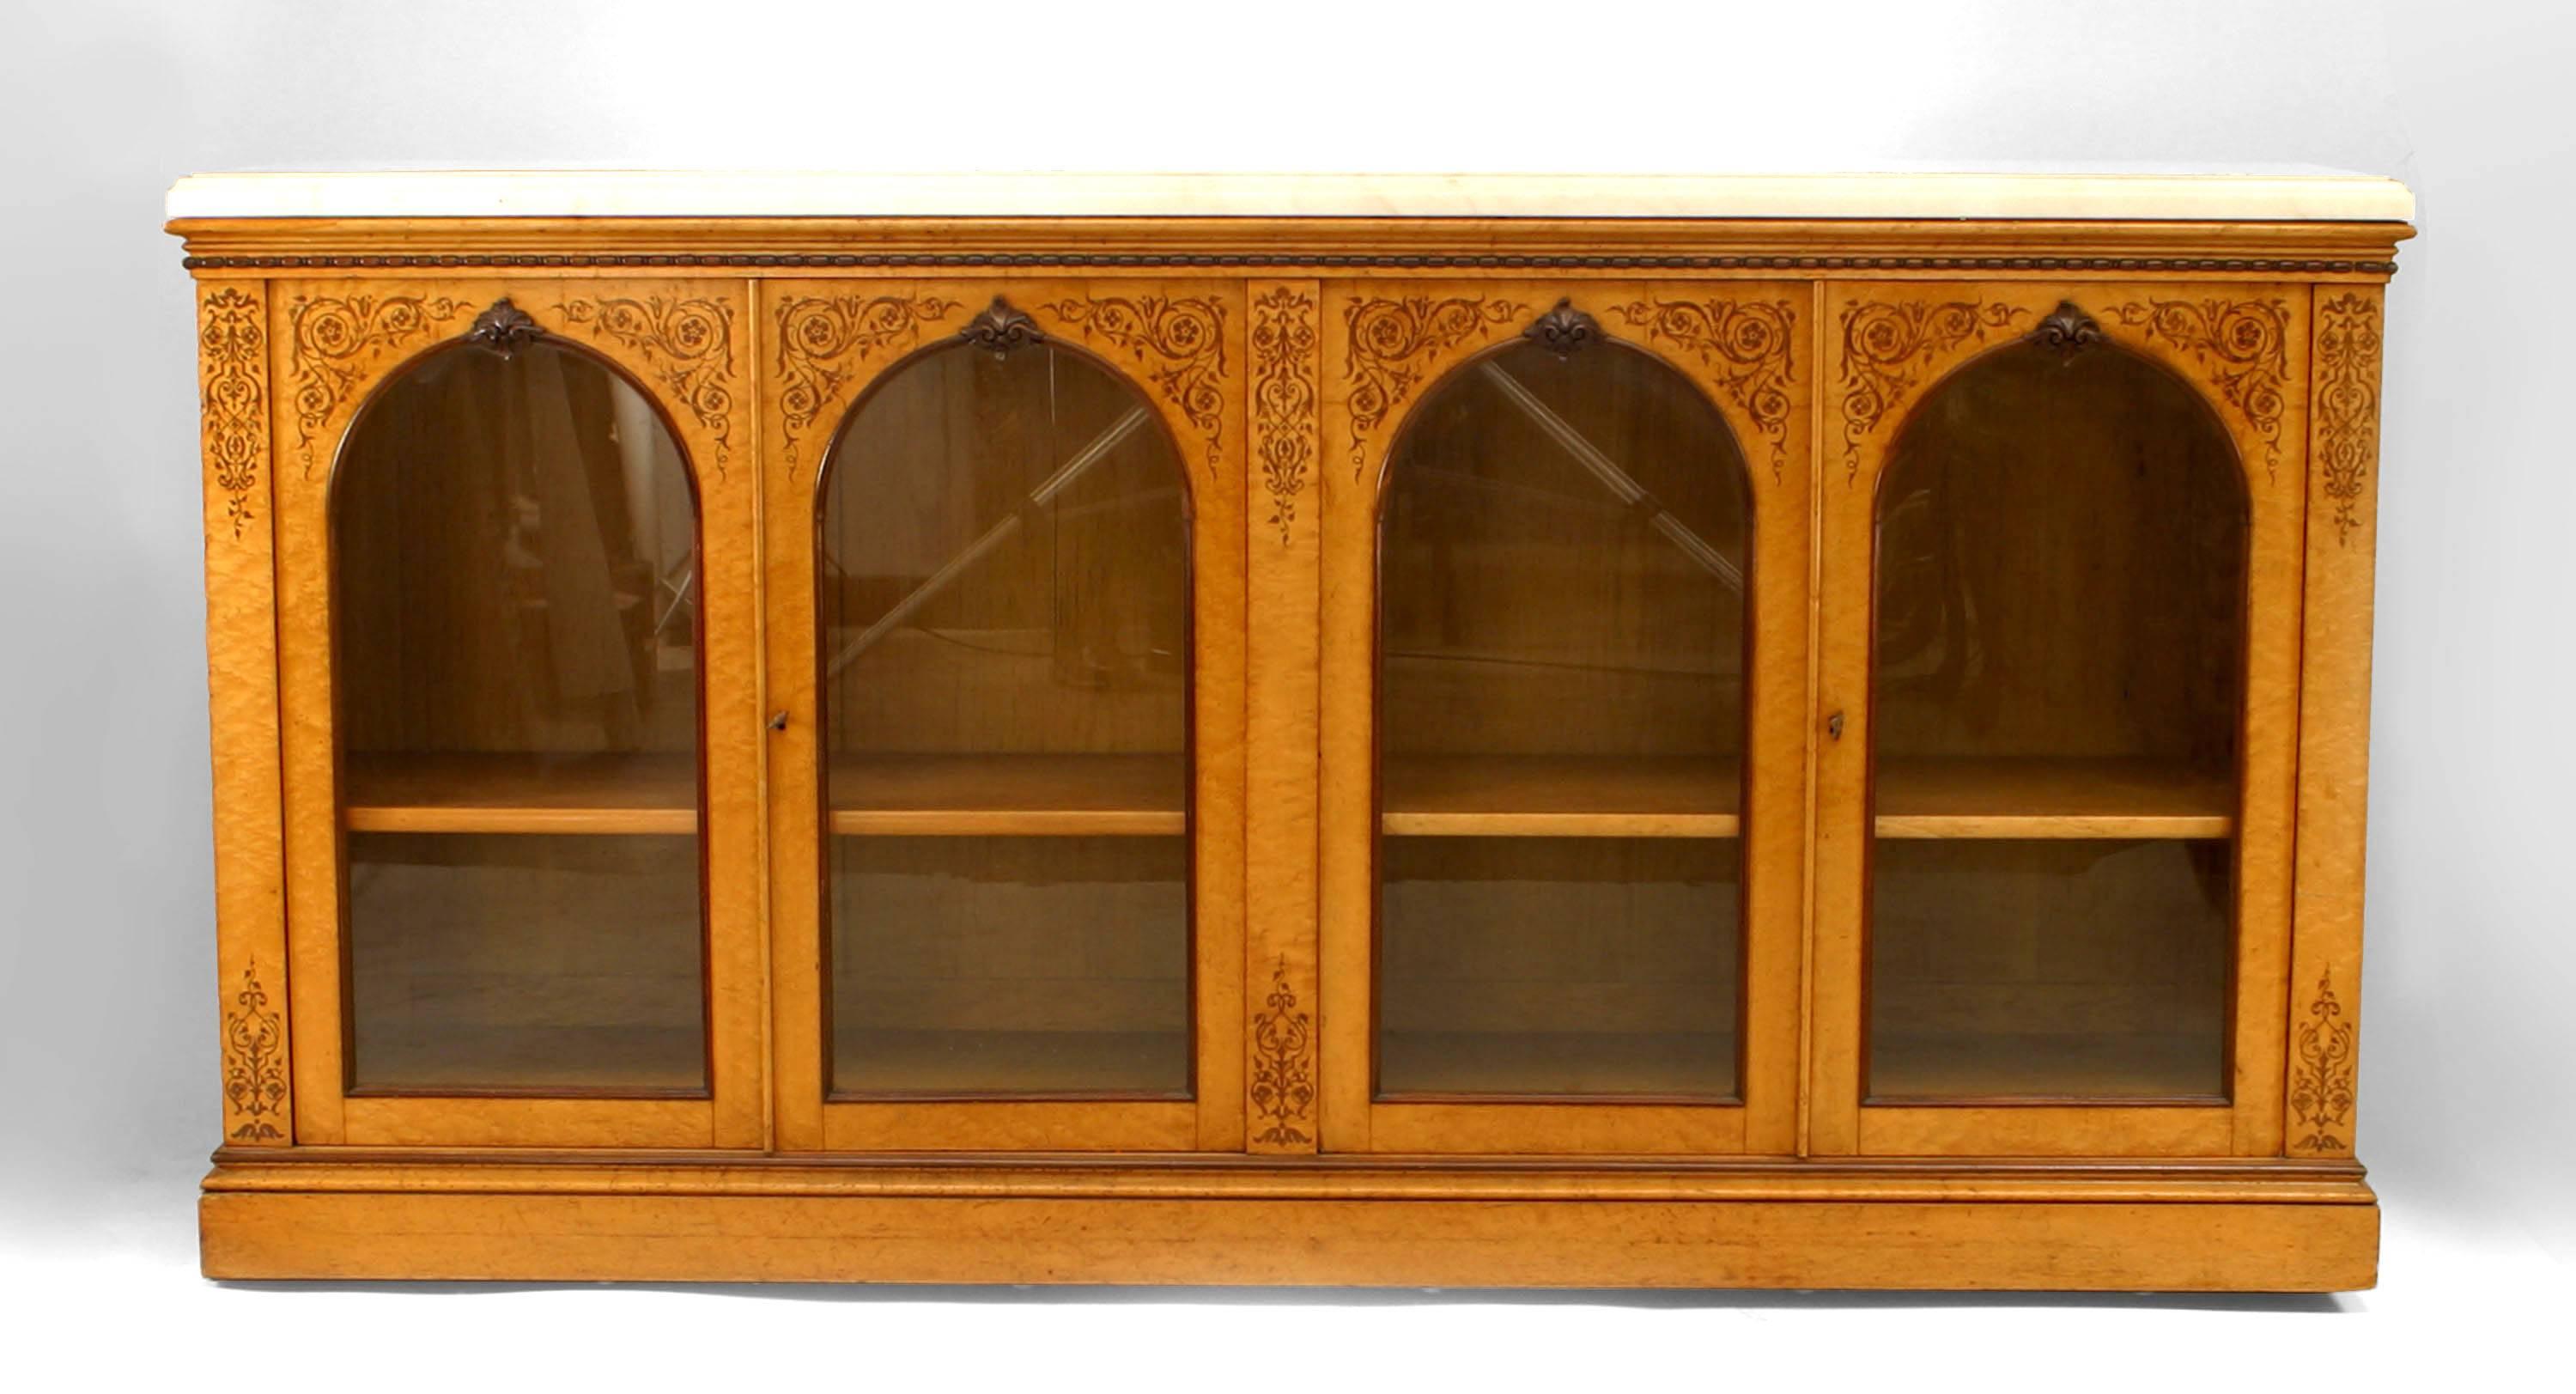 French Charles X maple and rosewood inlaid sideboard cabinet with 4 arched top doors and white marble top.
